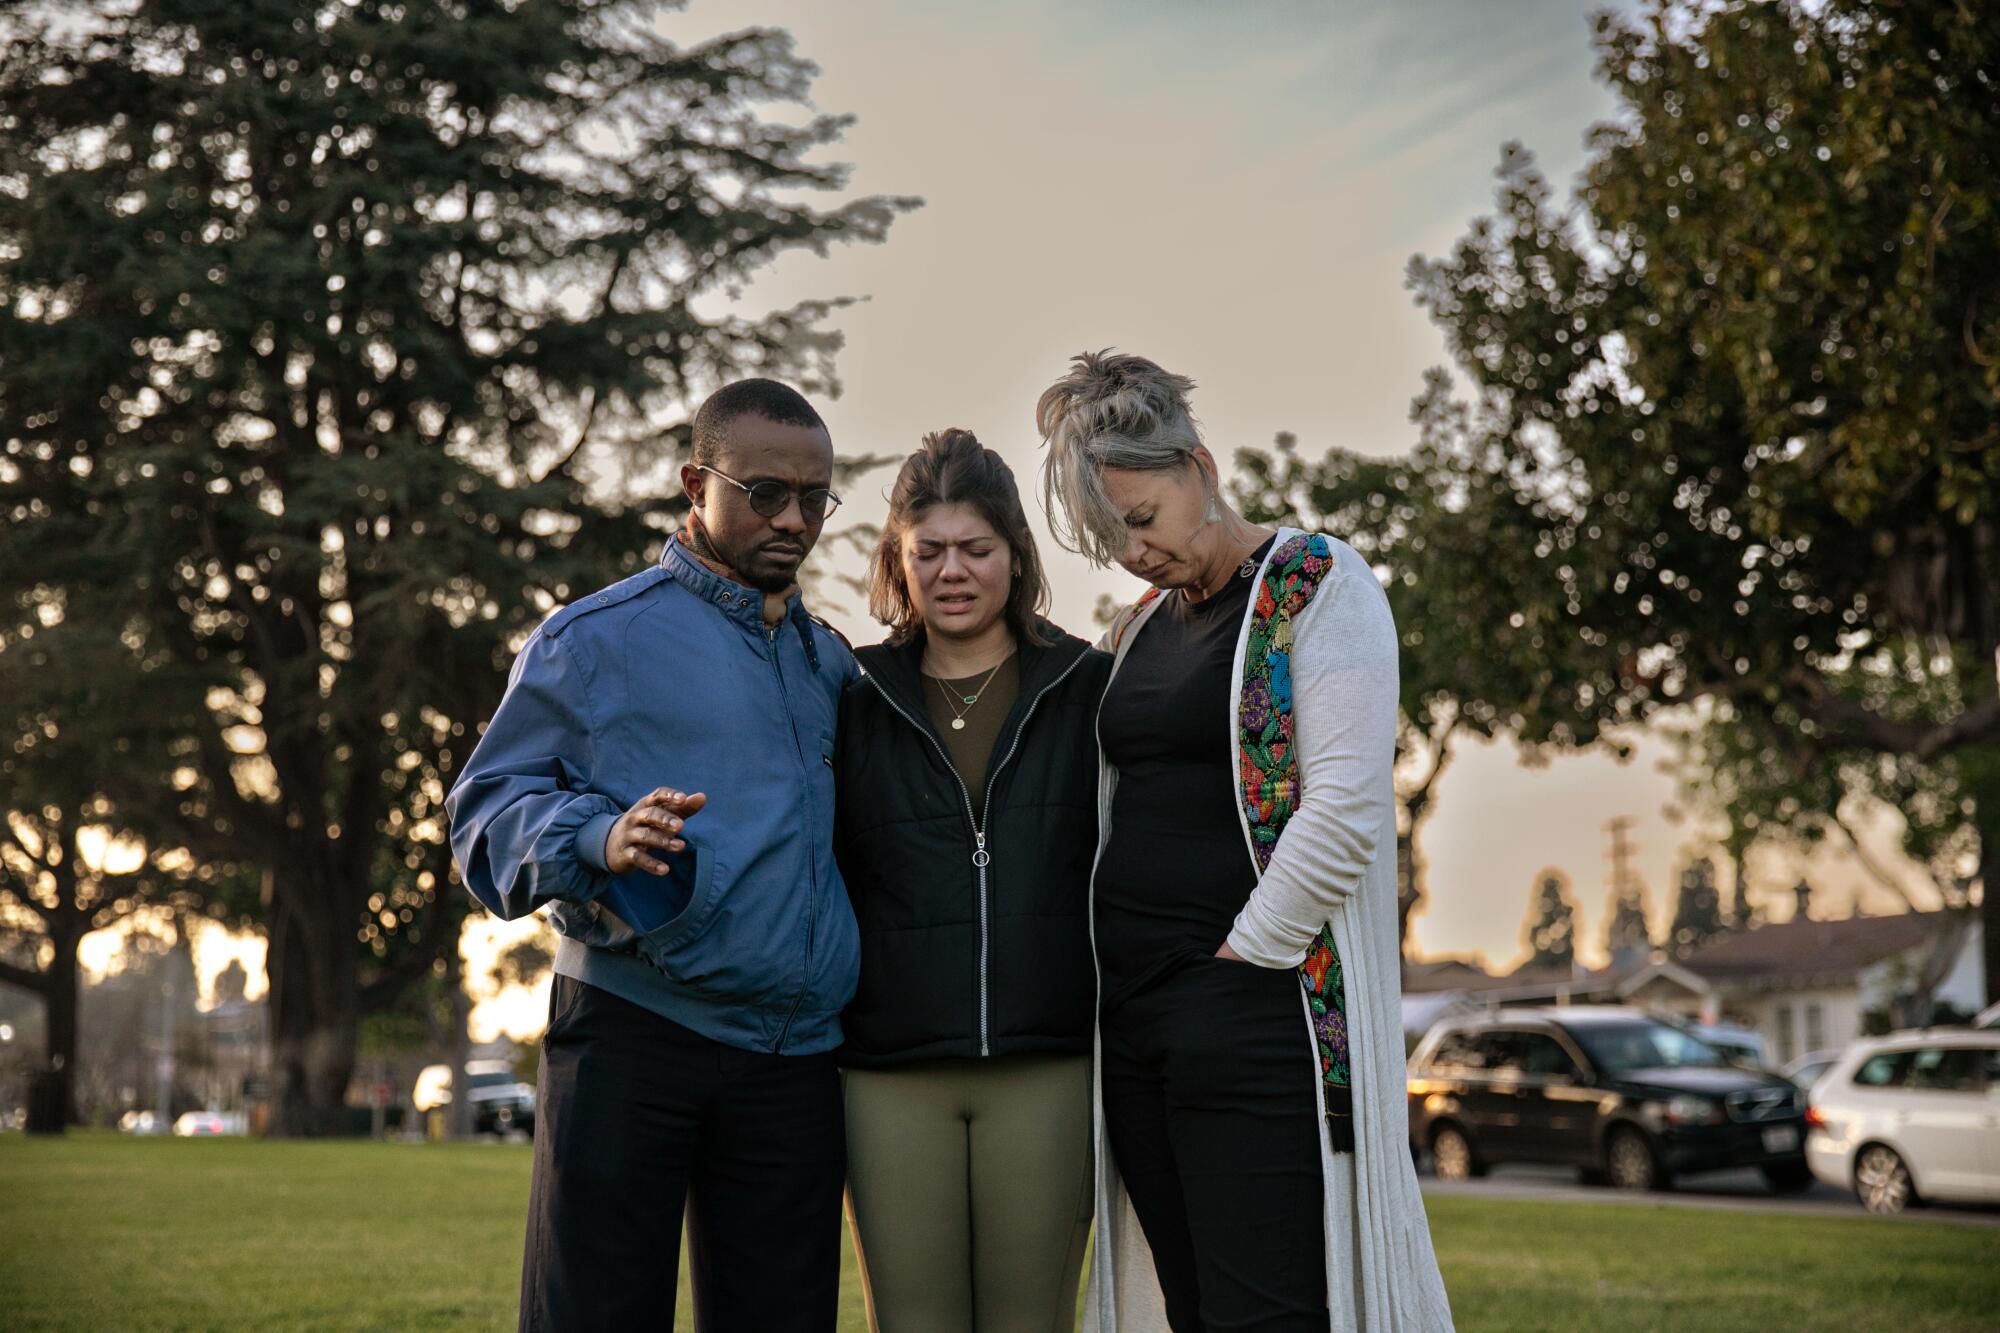 Three people stand together and pray in a grassy area.